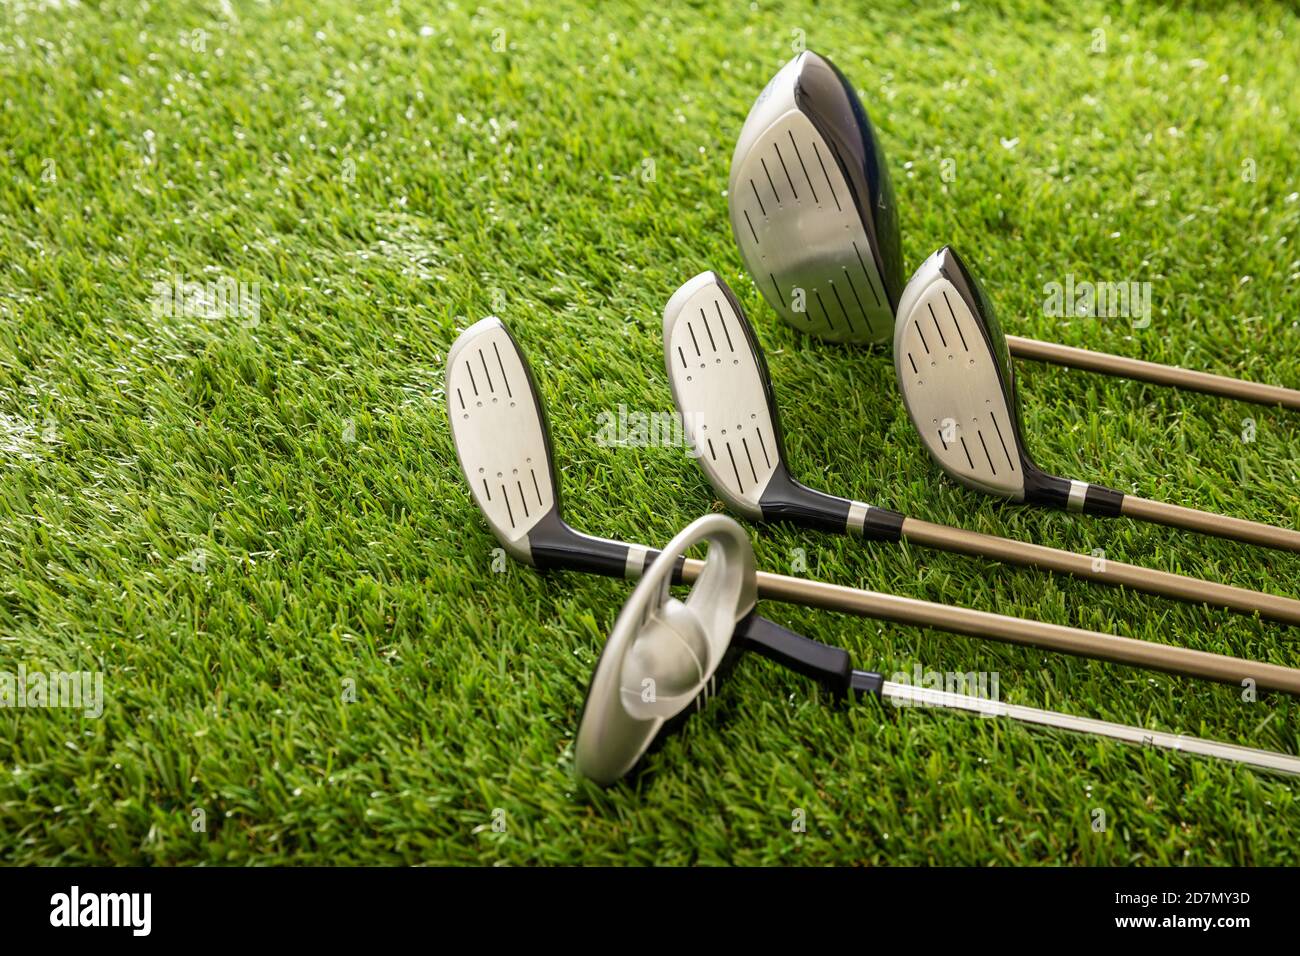 Golf sticks set on green course lawn, close up view. Golfing sport and club concept, copy space. Stock Photo